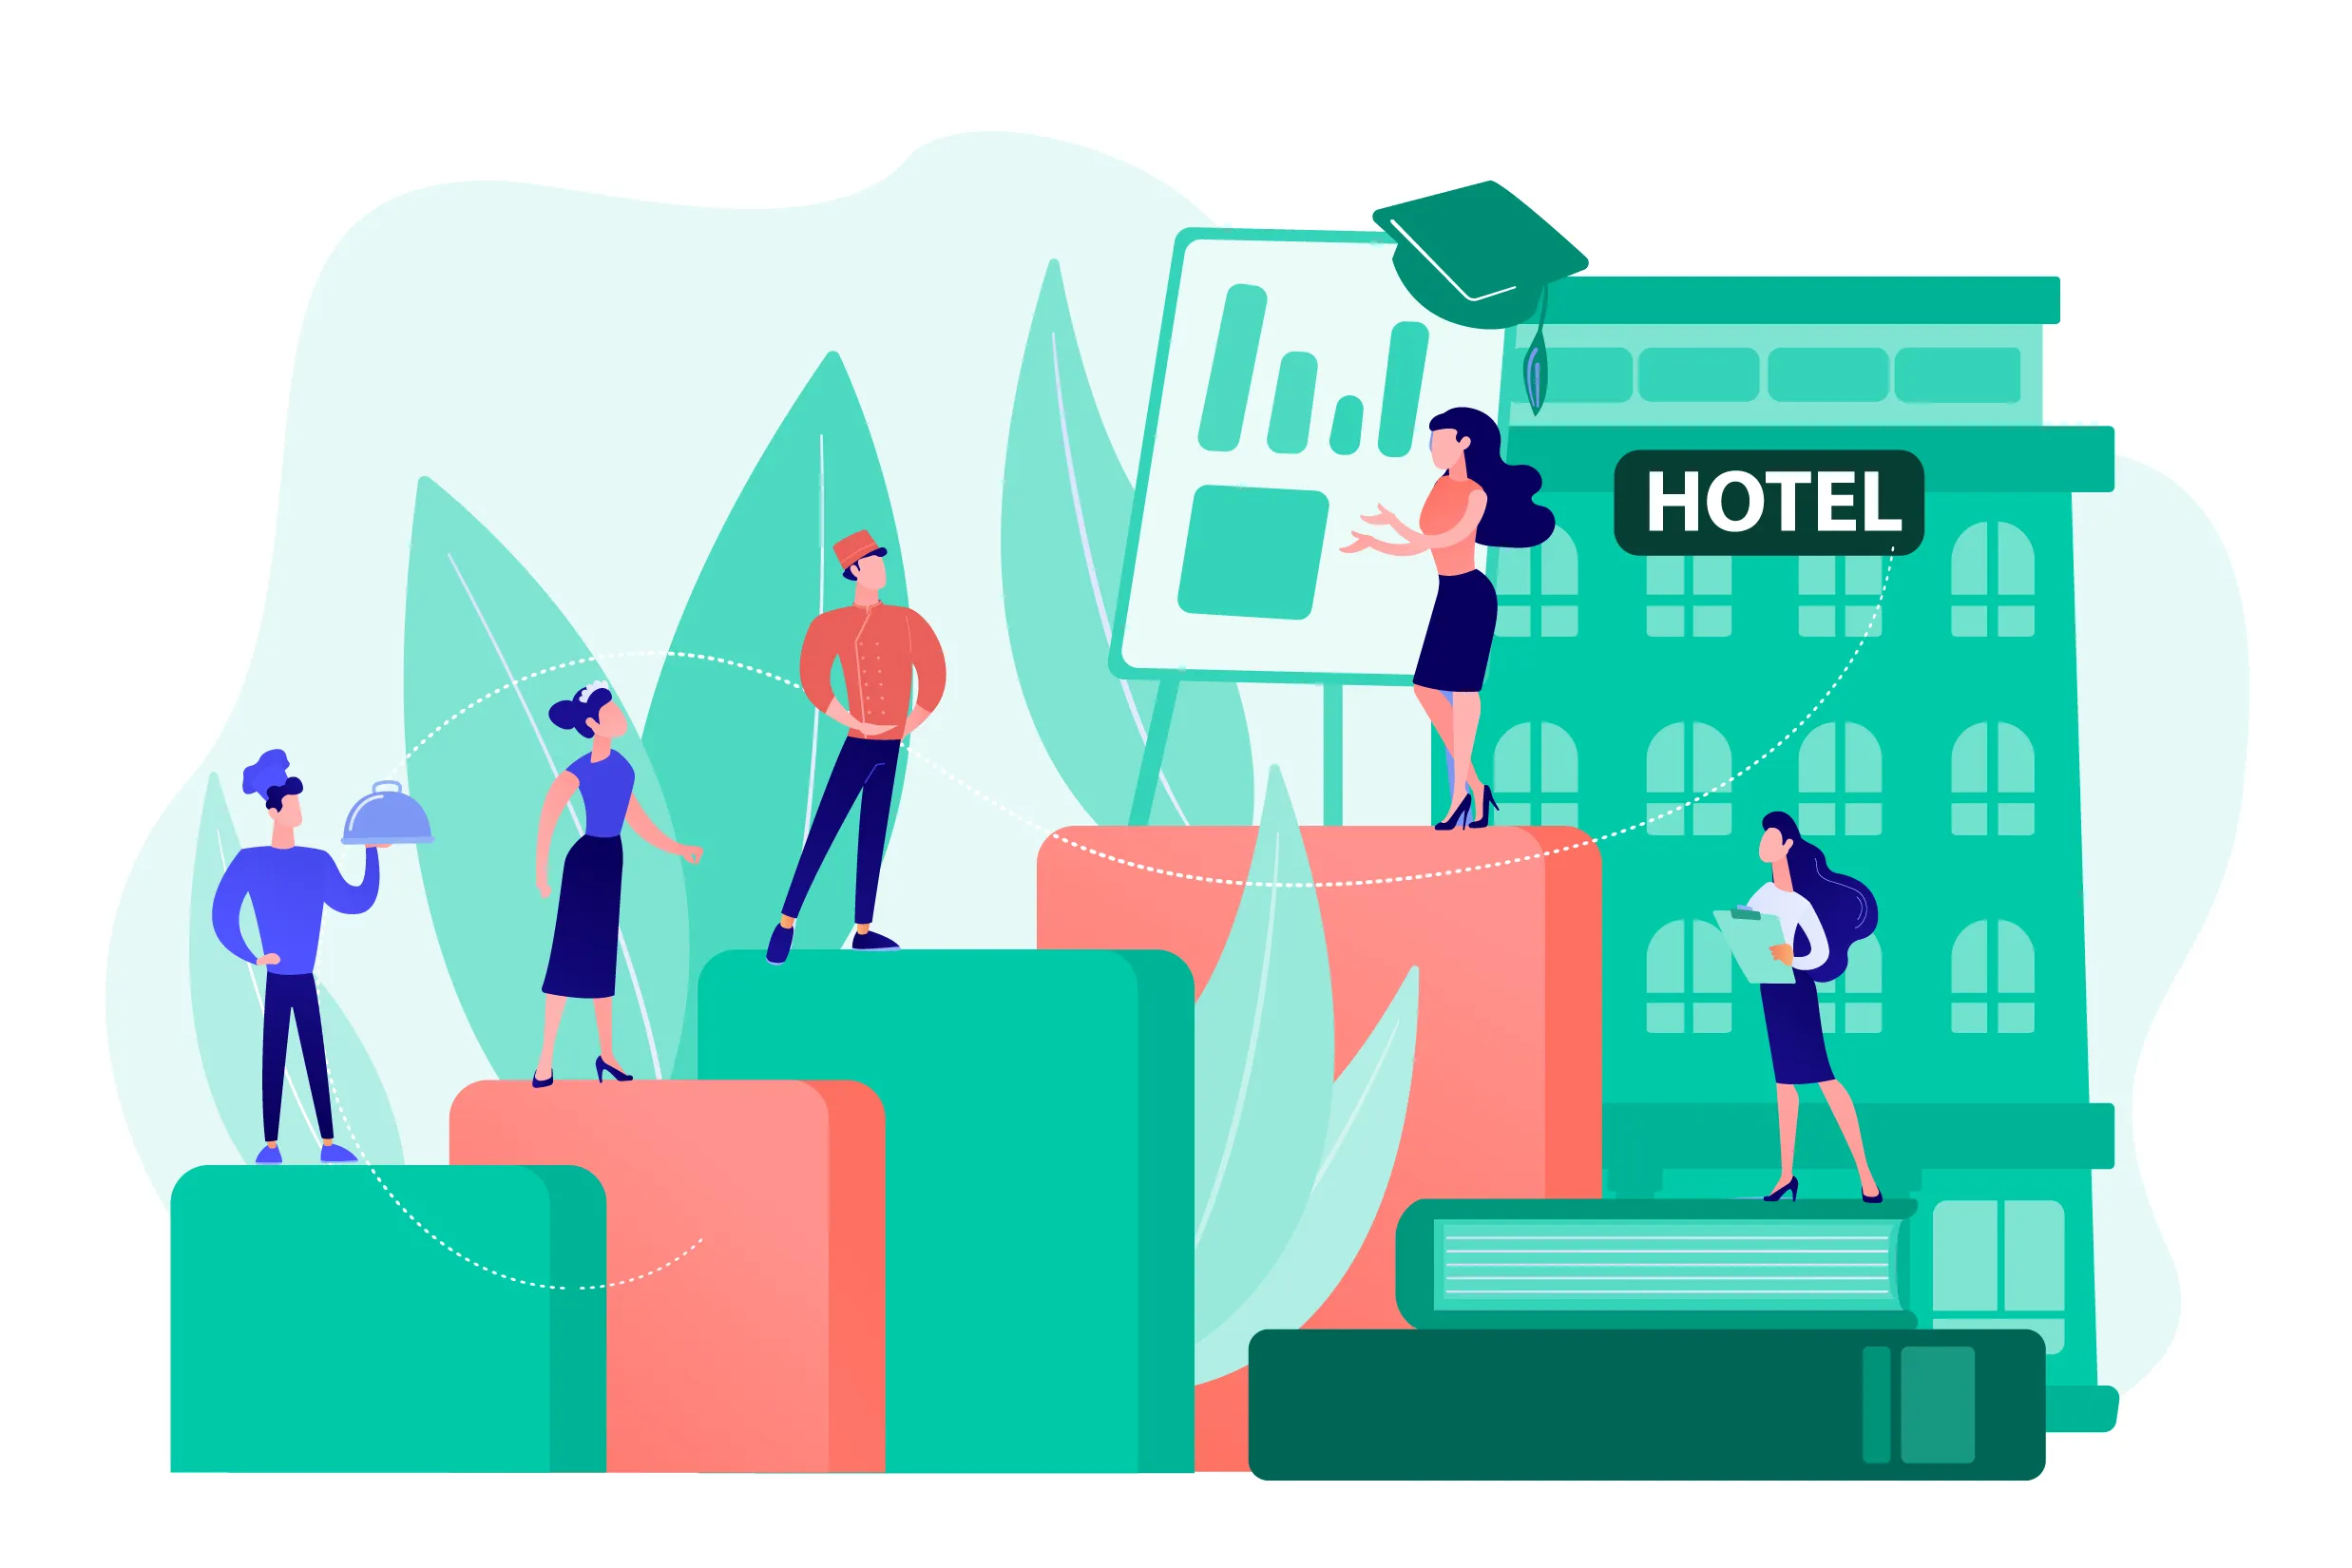 How Hotel CRM Software Helps Hotels to Understand Their Customers Better